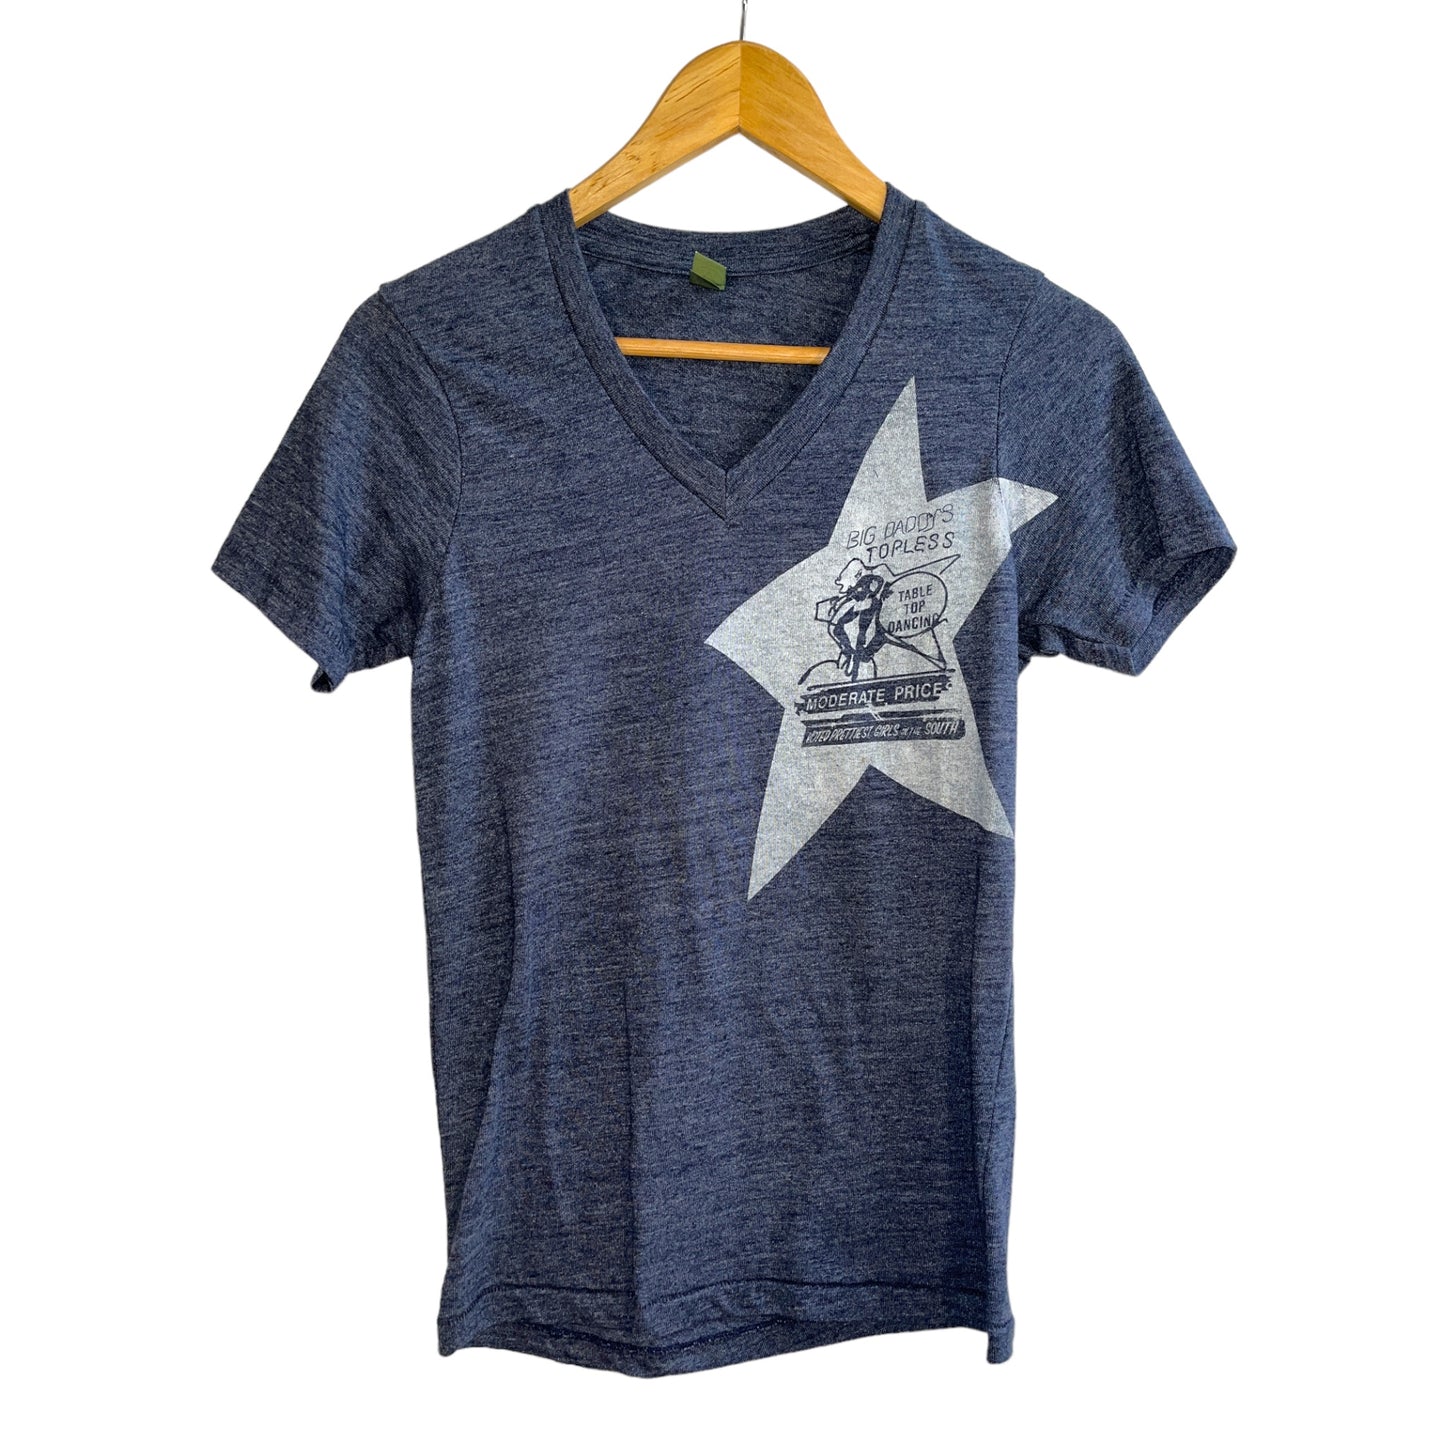 Porn Star - Blue V-neck T-shirt Size XS - by Devils May Care